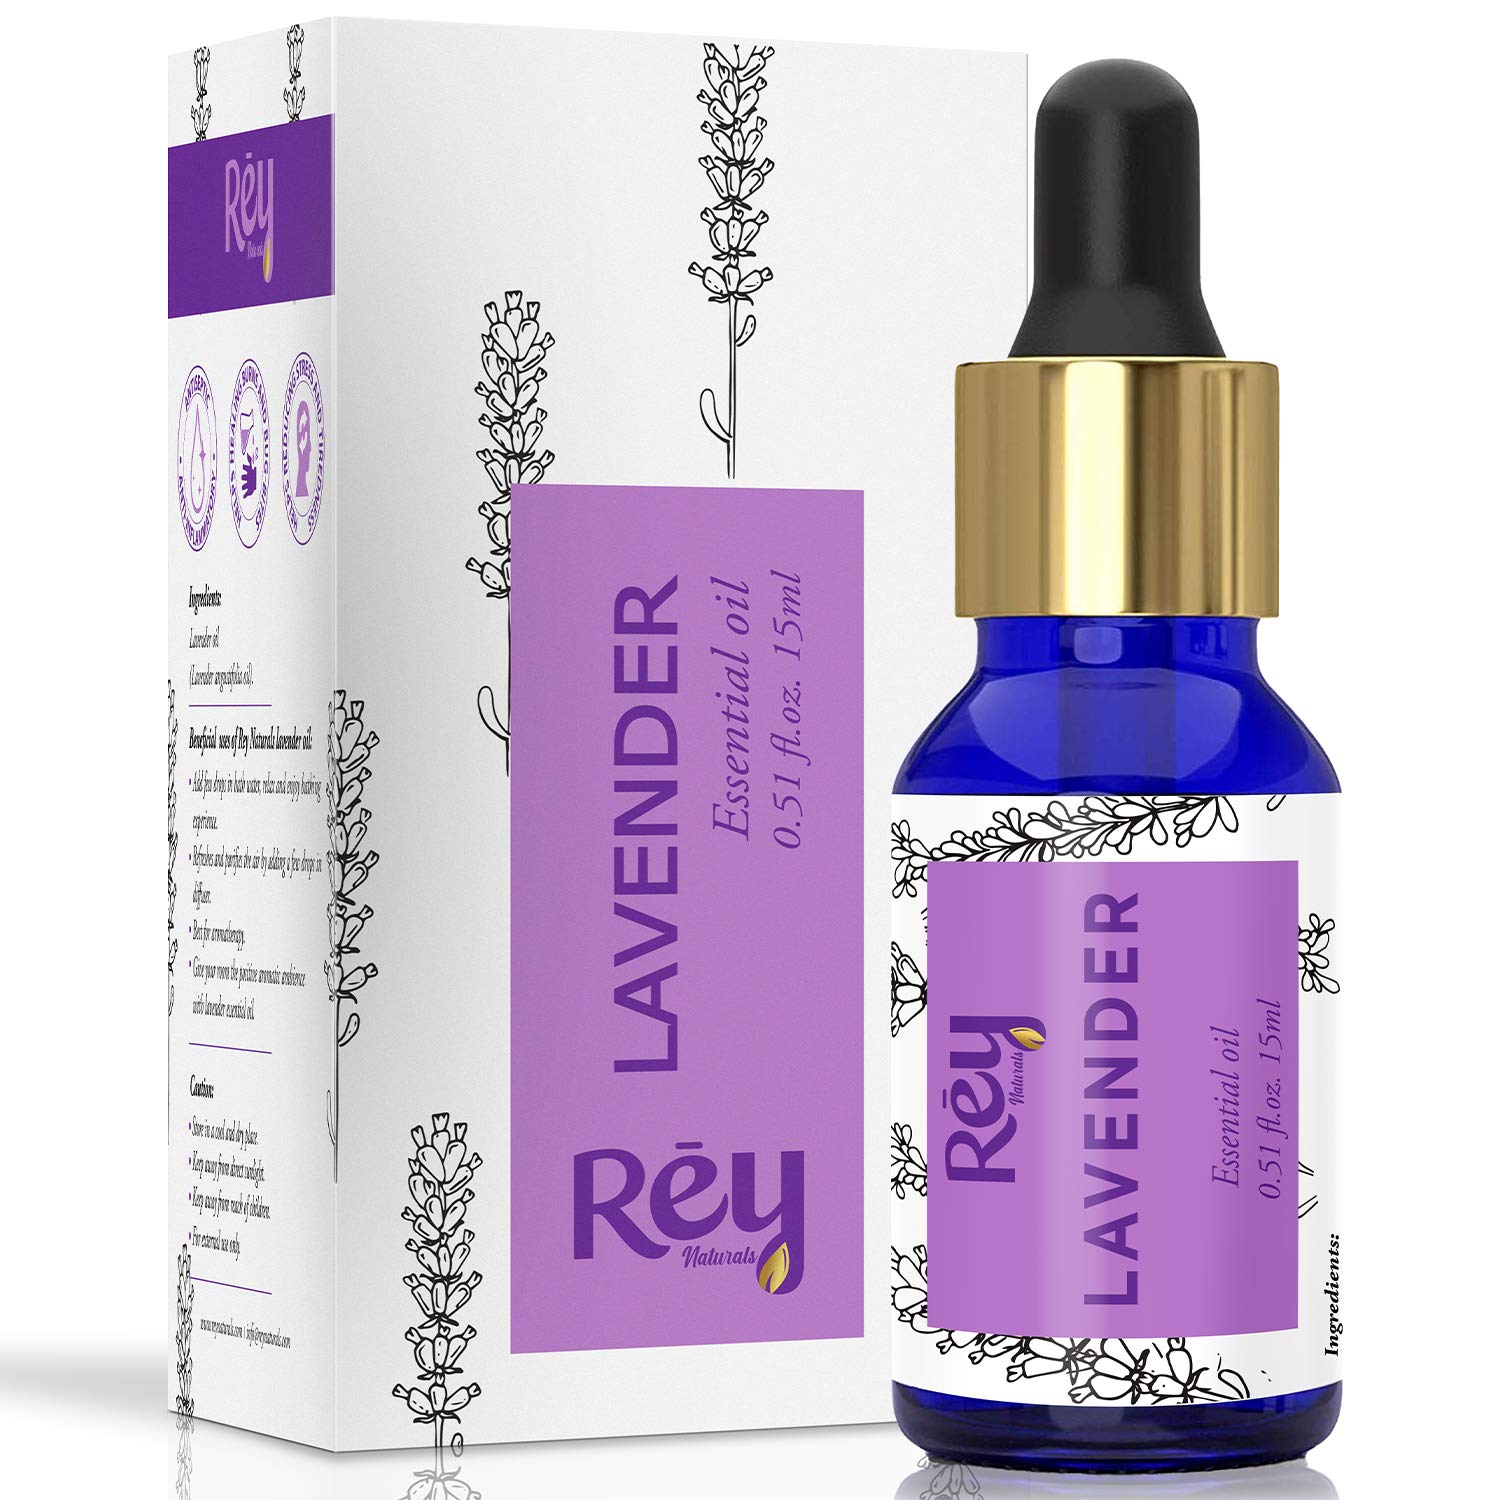 Rey Naturals Lavender Essential Oil - Calming, Healing & Nourishing - 100% Pure, Natural Lavender Oil - For Hair, Skin & Aromatherapy - 15ml